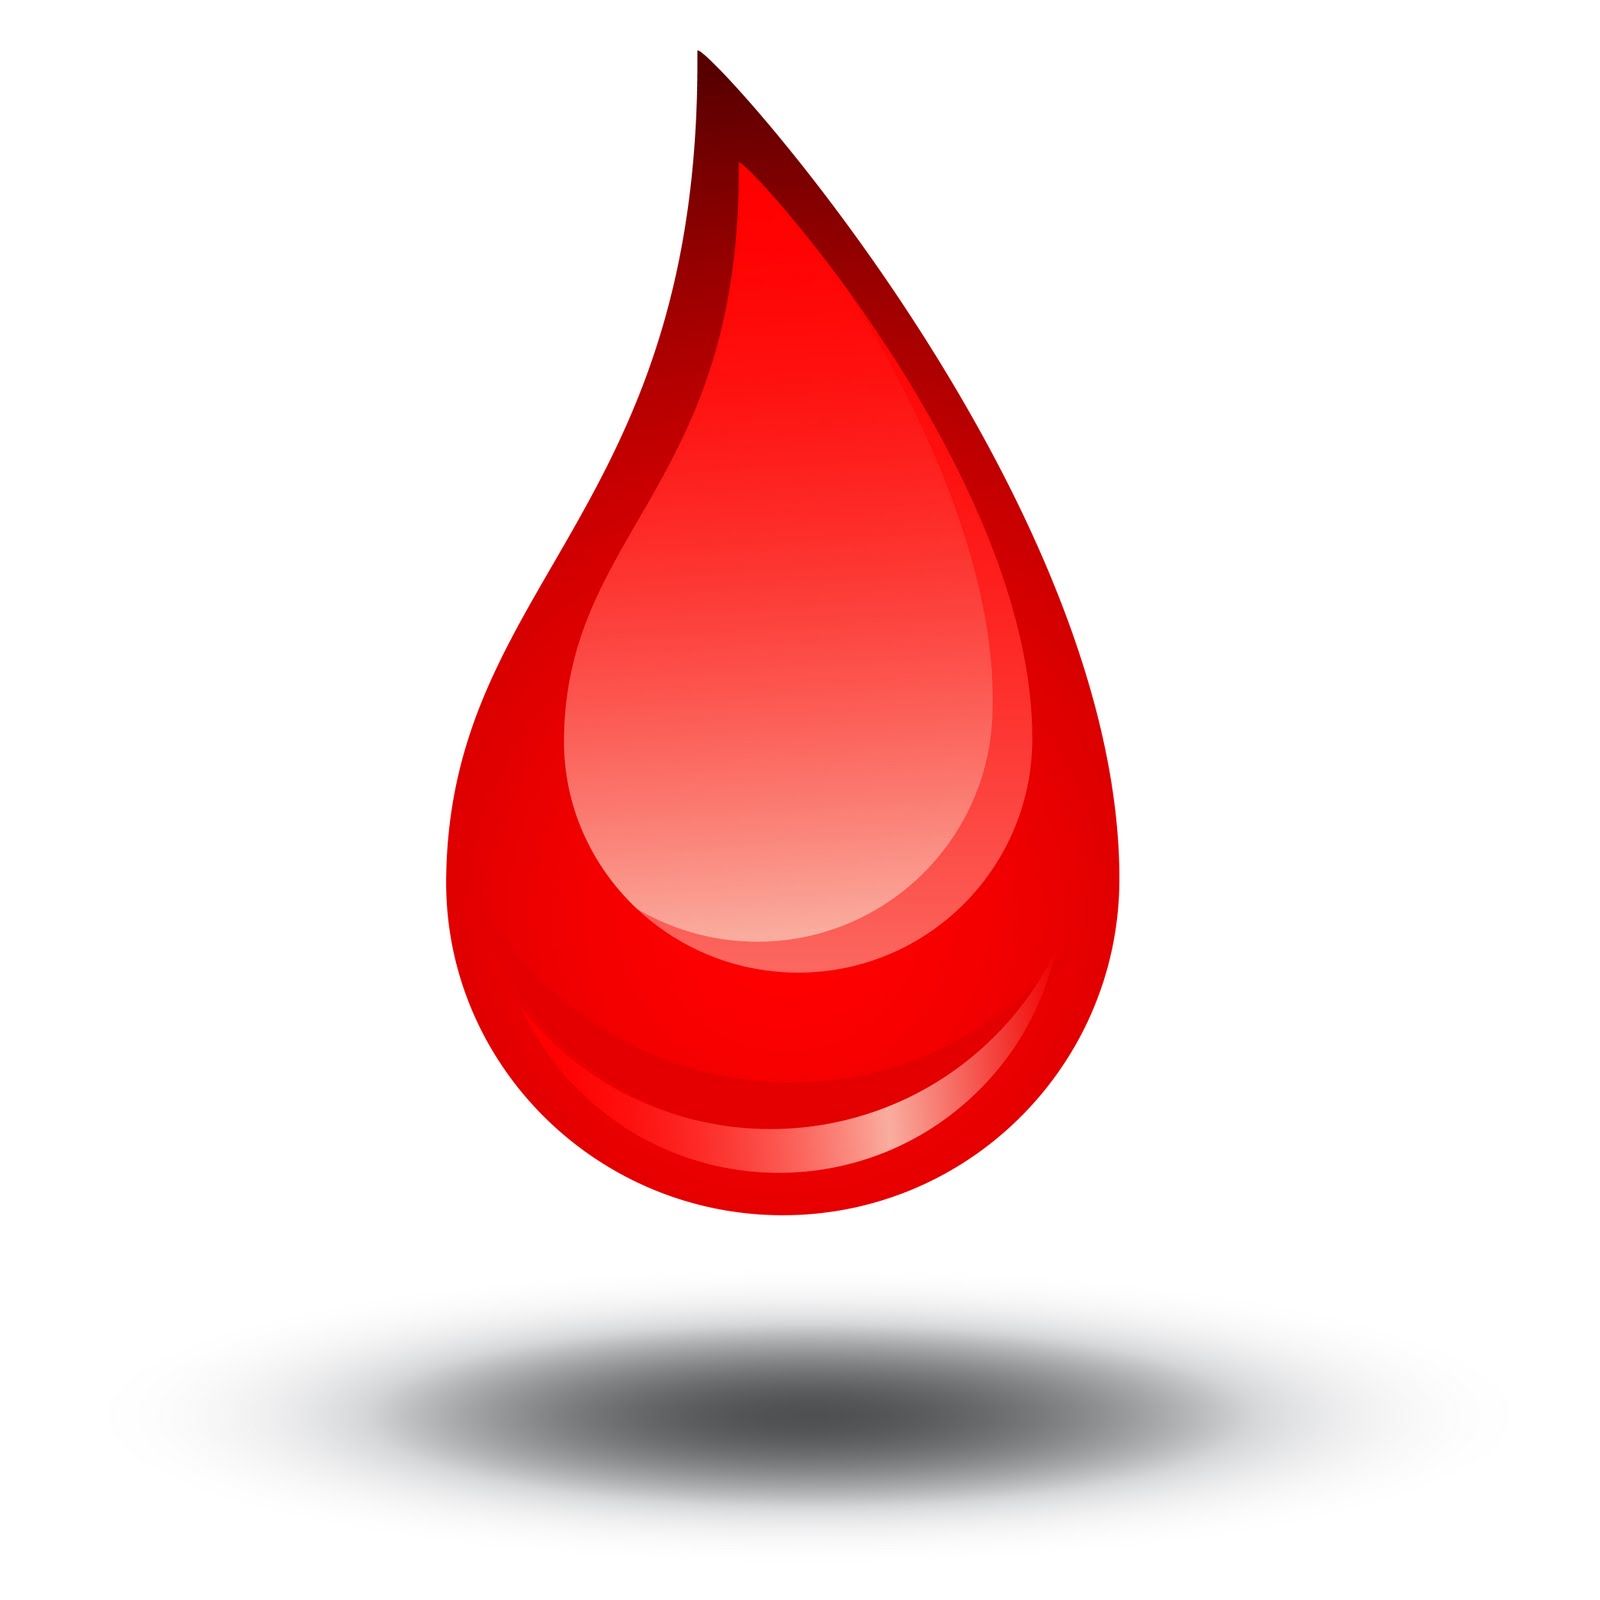 blood donation clipart - photo #48